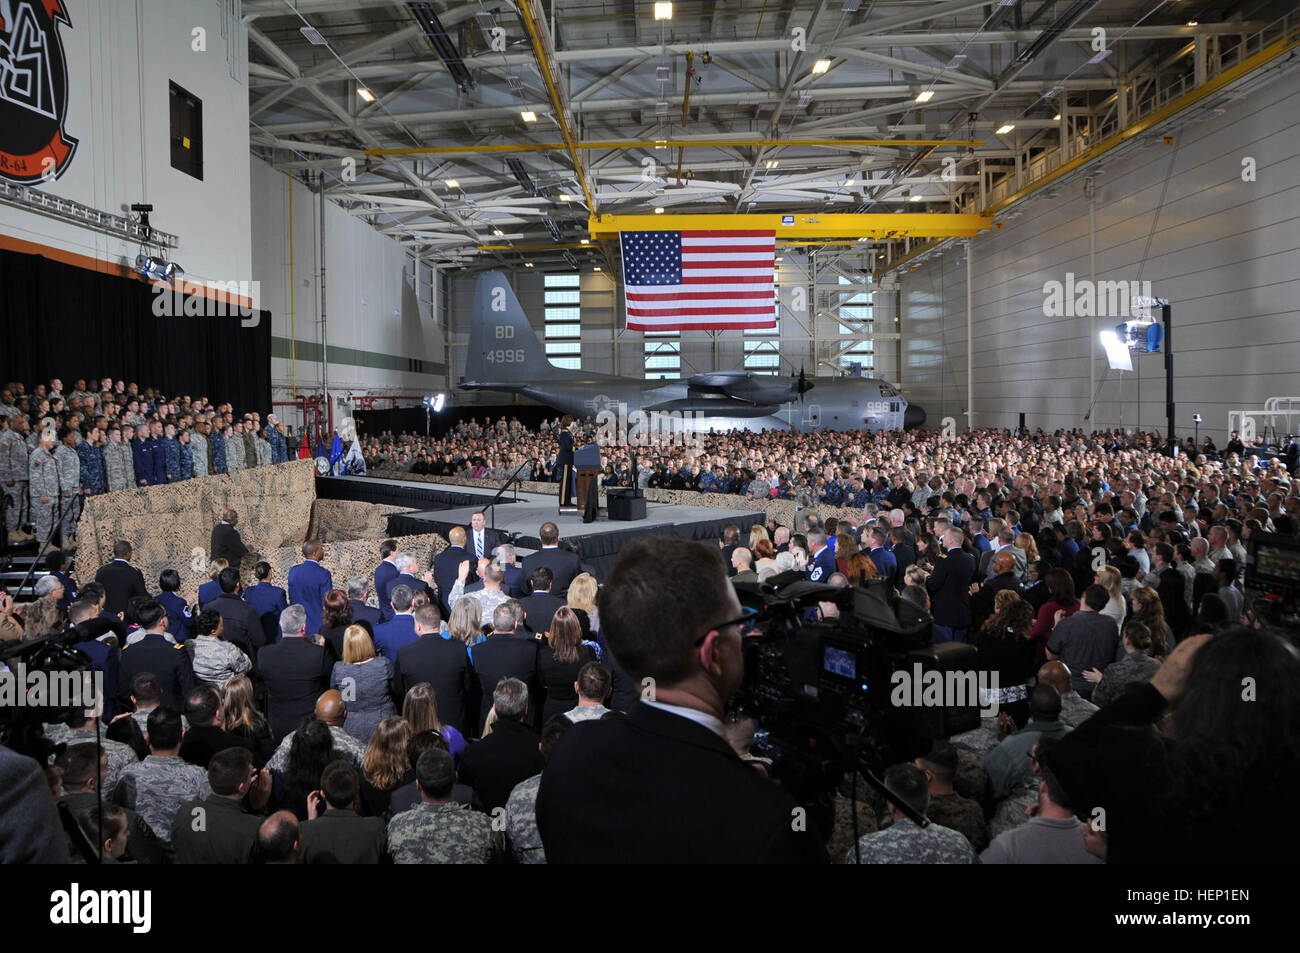 Maj. Gen. Margaret W. Boor, commanding general of the Army Reserve’s 99th Regional Support Command, speaks during a visit by U.S. President Barack Obama with an audience of 3,000 service members, military families, civic leaders and elected officials Dec. 15 inside a U.S. Marine hangar on Joint Base McGuire-Dix-Lakehurst, N.J. The purpose of the president’s visit to JB MDL was to thank troops for their service. Also speaking at the event was Maj. Gen. Rick Martin, commanding general of the U.S. Air Force Expeditionary Center. President Obama thanks troops at New Jersey's Joint Base MDL 141215- Stock Photo